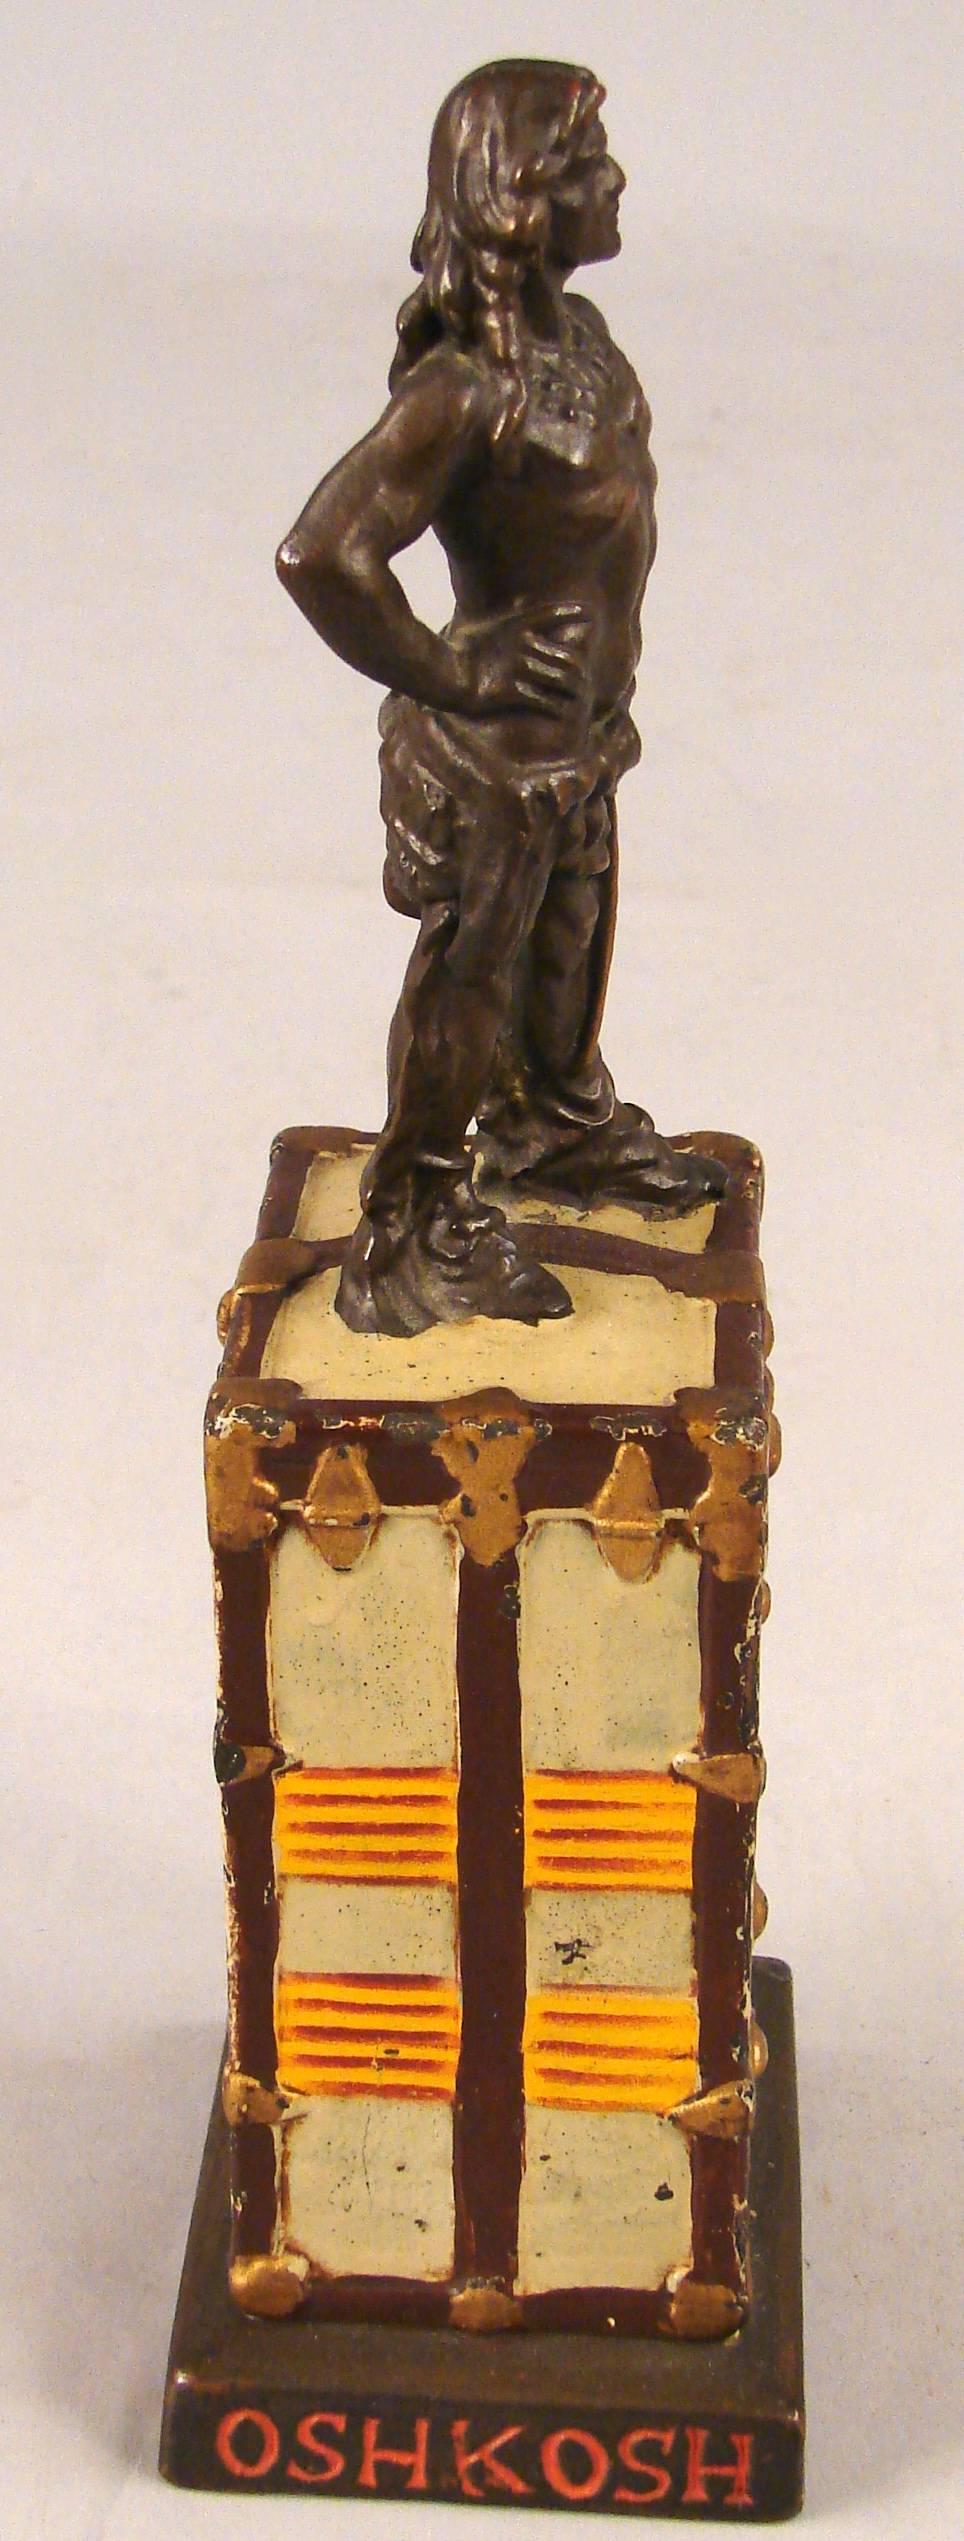 A rare American painted metal Oshkosh countertop advertising piece depicting a painted trunk surmounted with a figure of Chief Oshkosh. The Oshkosh luggage company ceased to exist in the middle of the 20th century. This piece advertised a line of